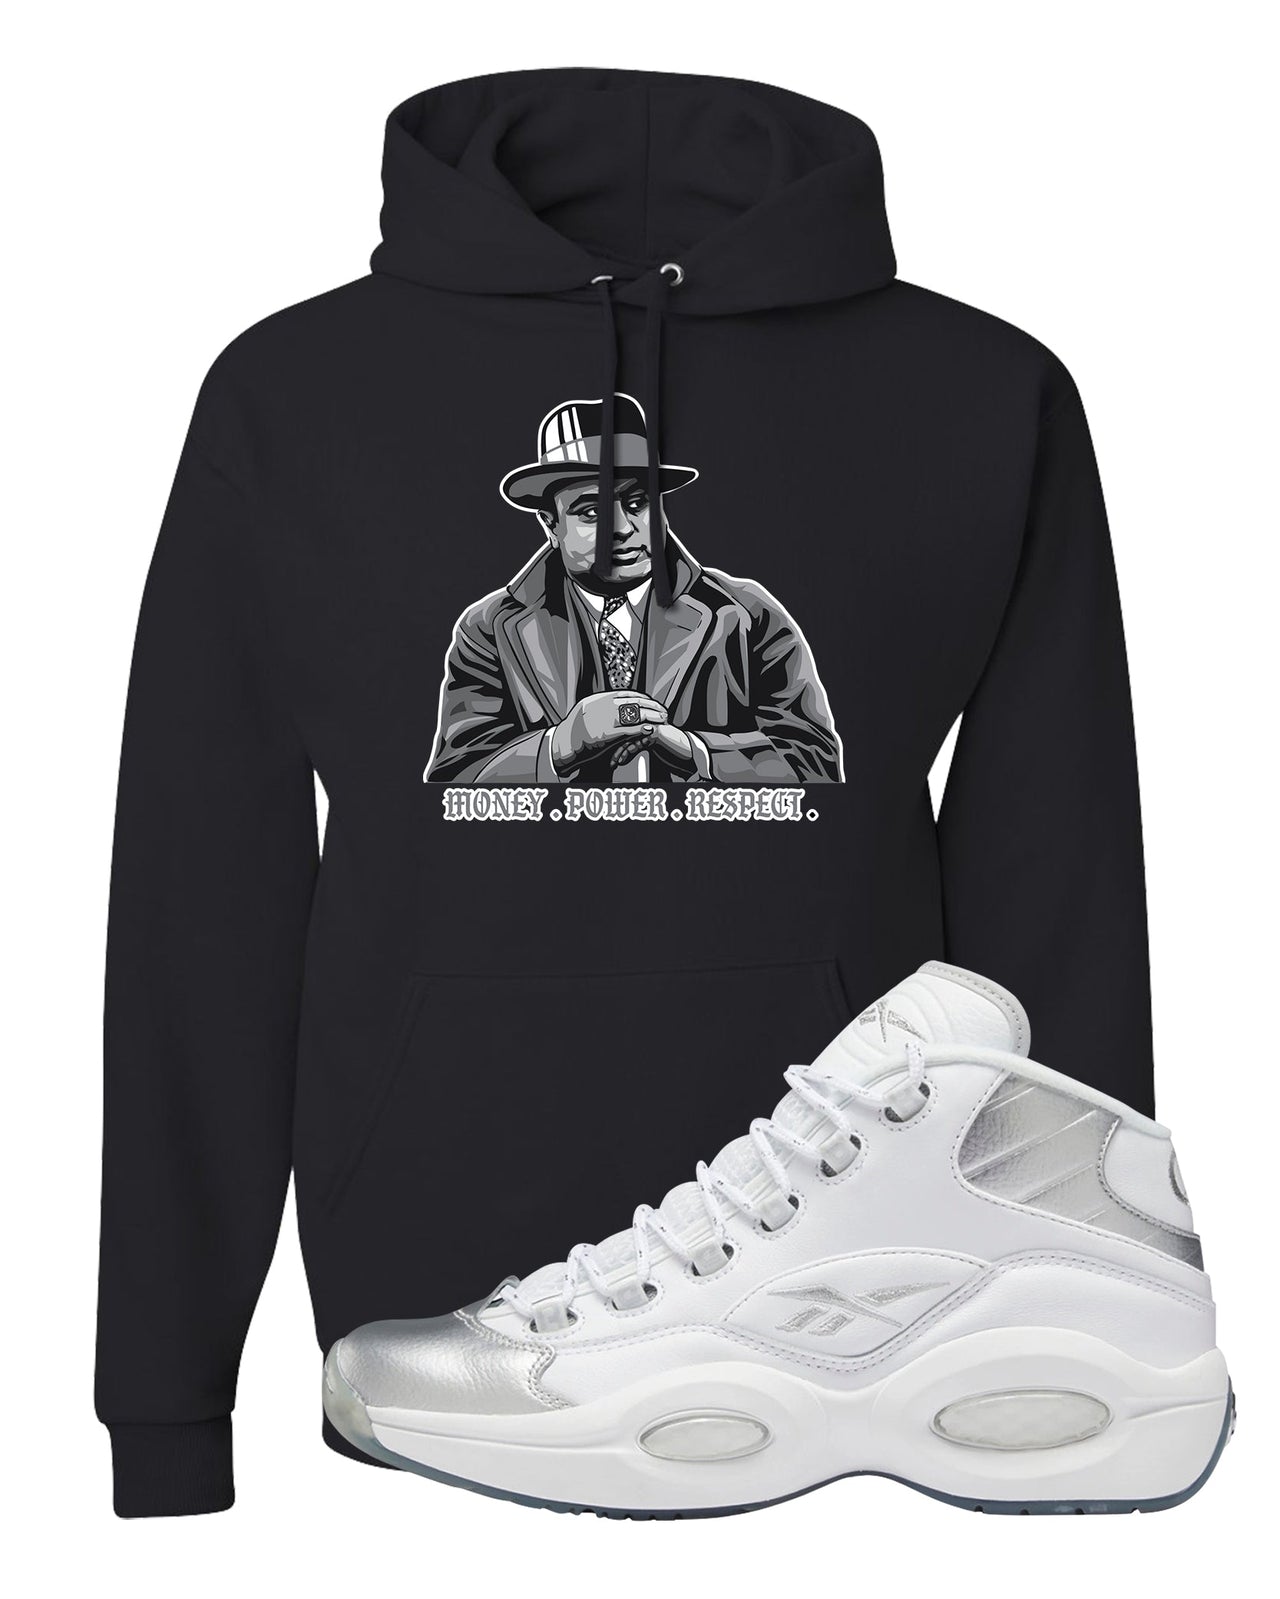 25th Anniversary Mid Questions Hoodie | Capone Illustration, Black